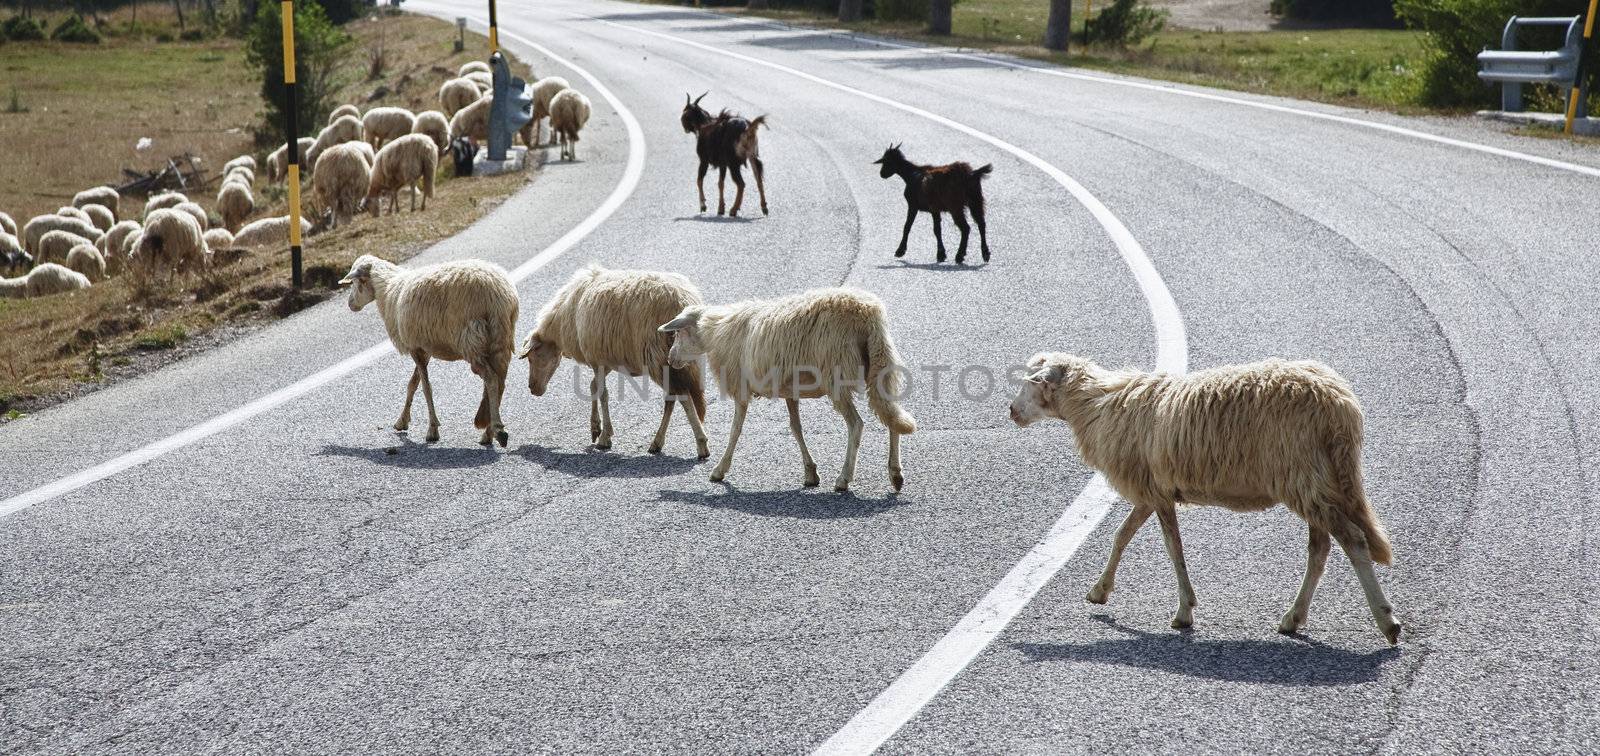 Sheep crossing a road by ABCDK